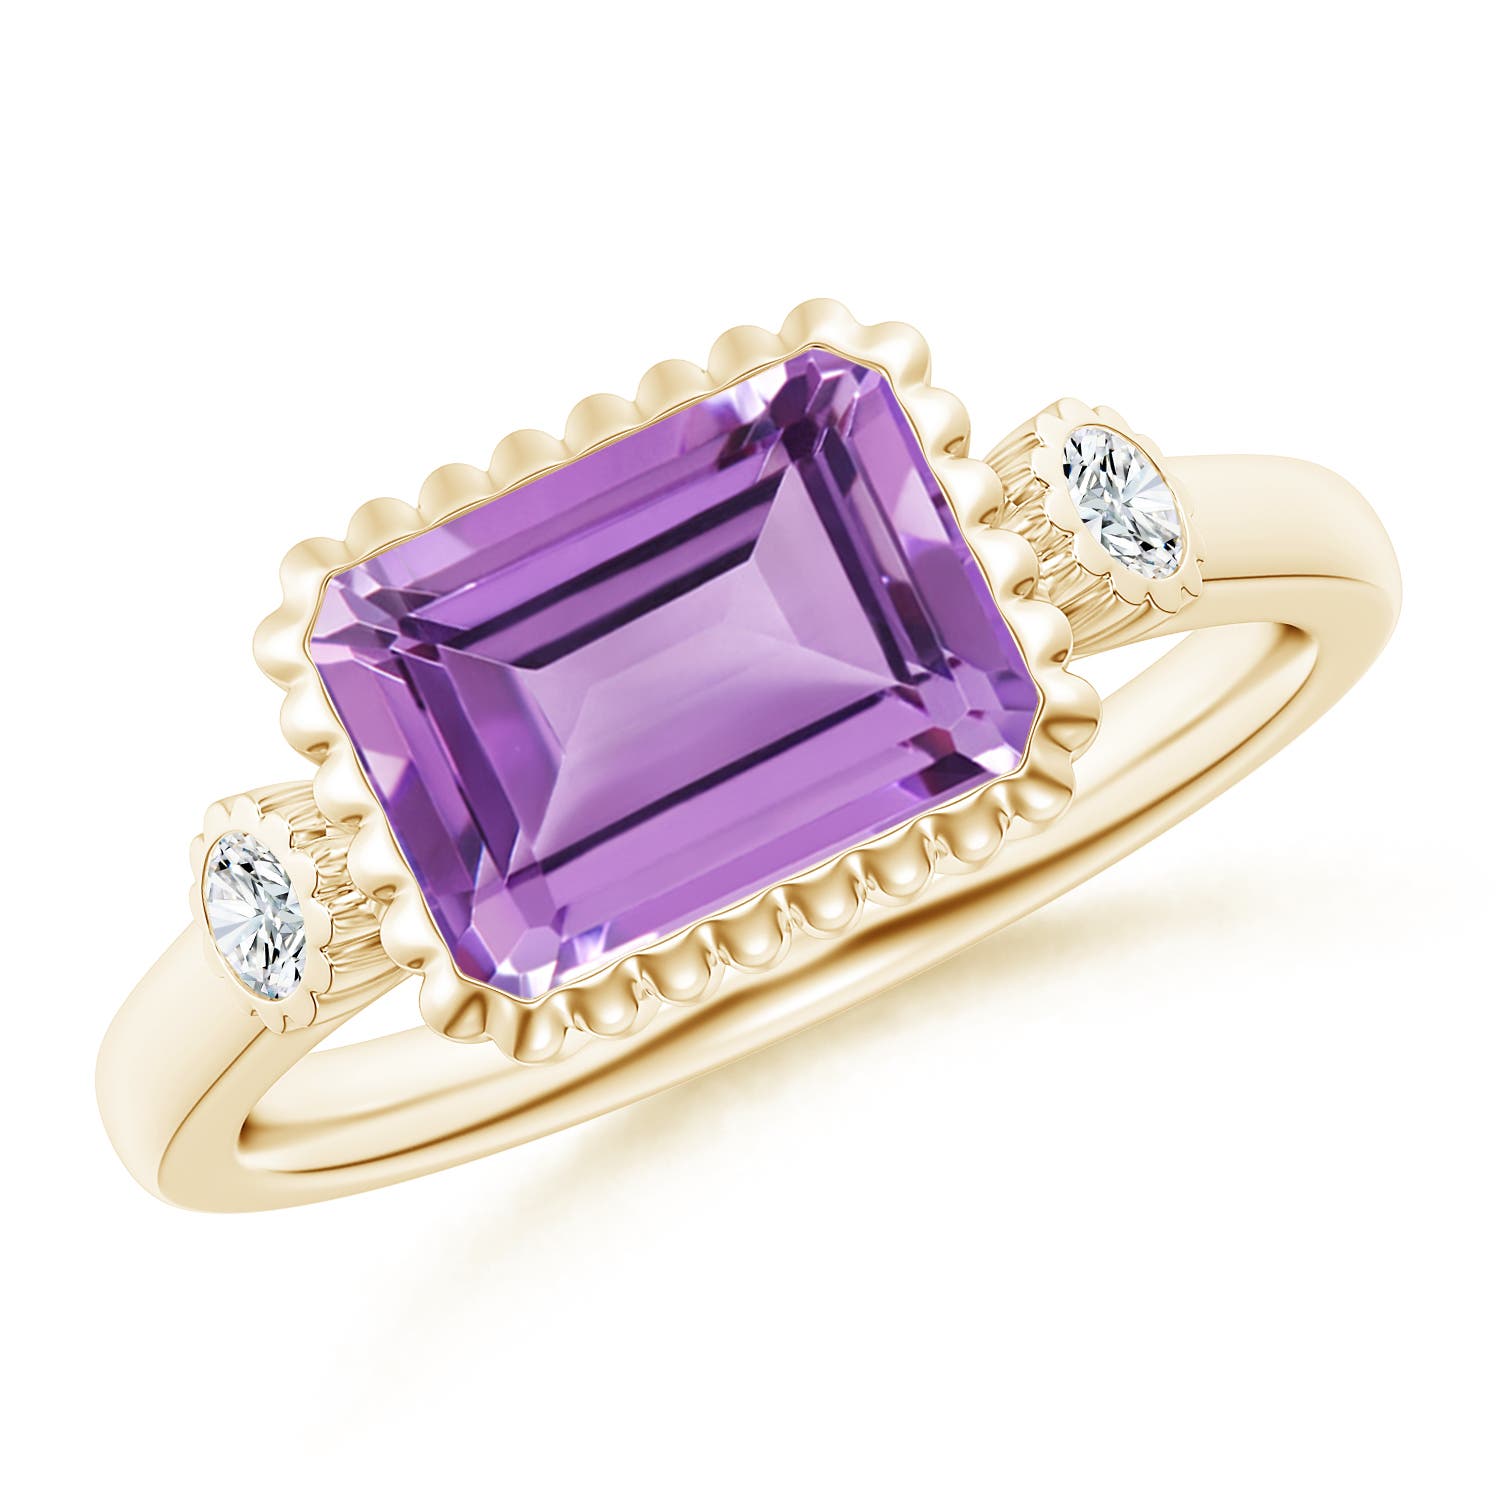 A - Amethyst / 2.34 CT / 14 KT Yellow Gold